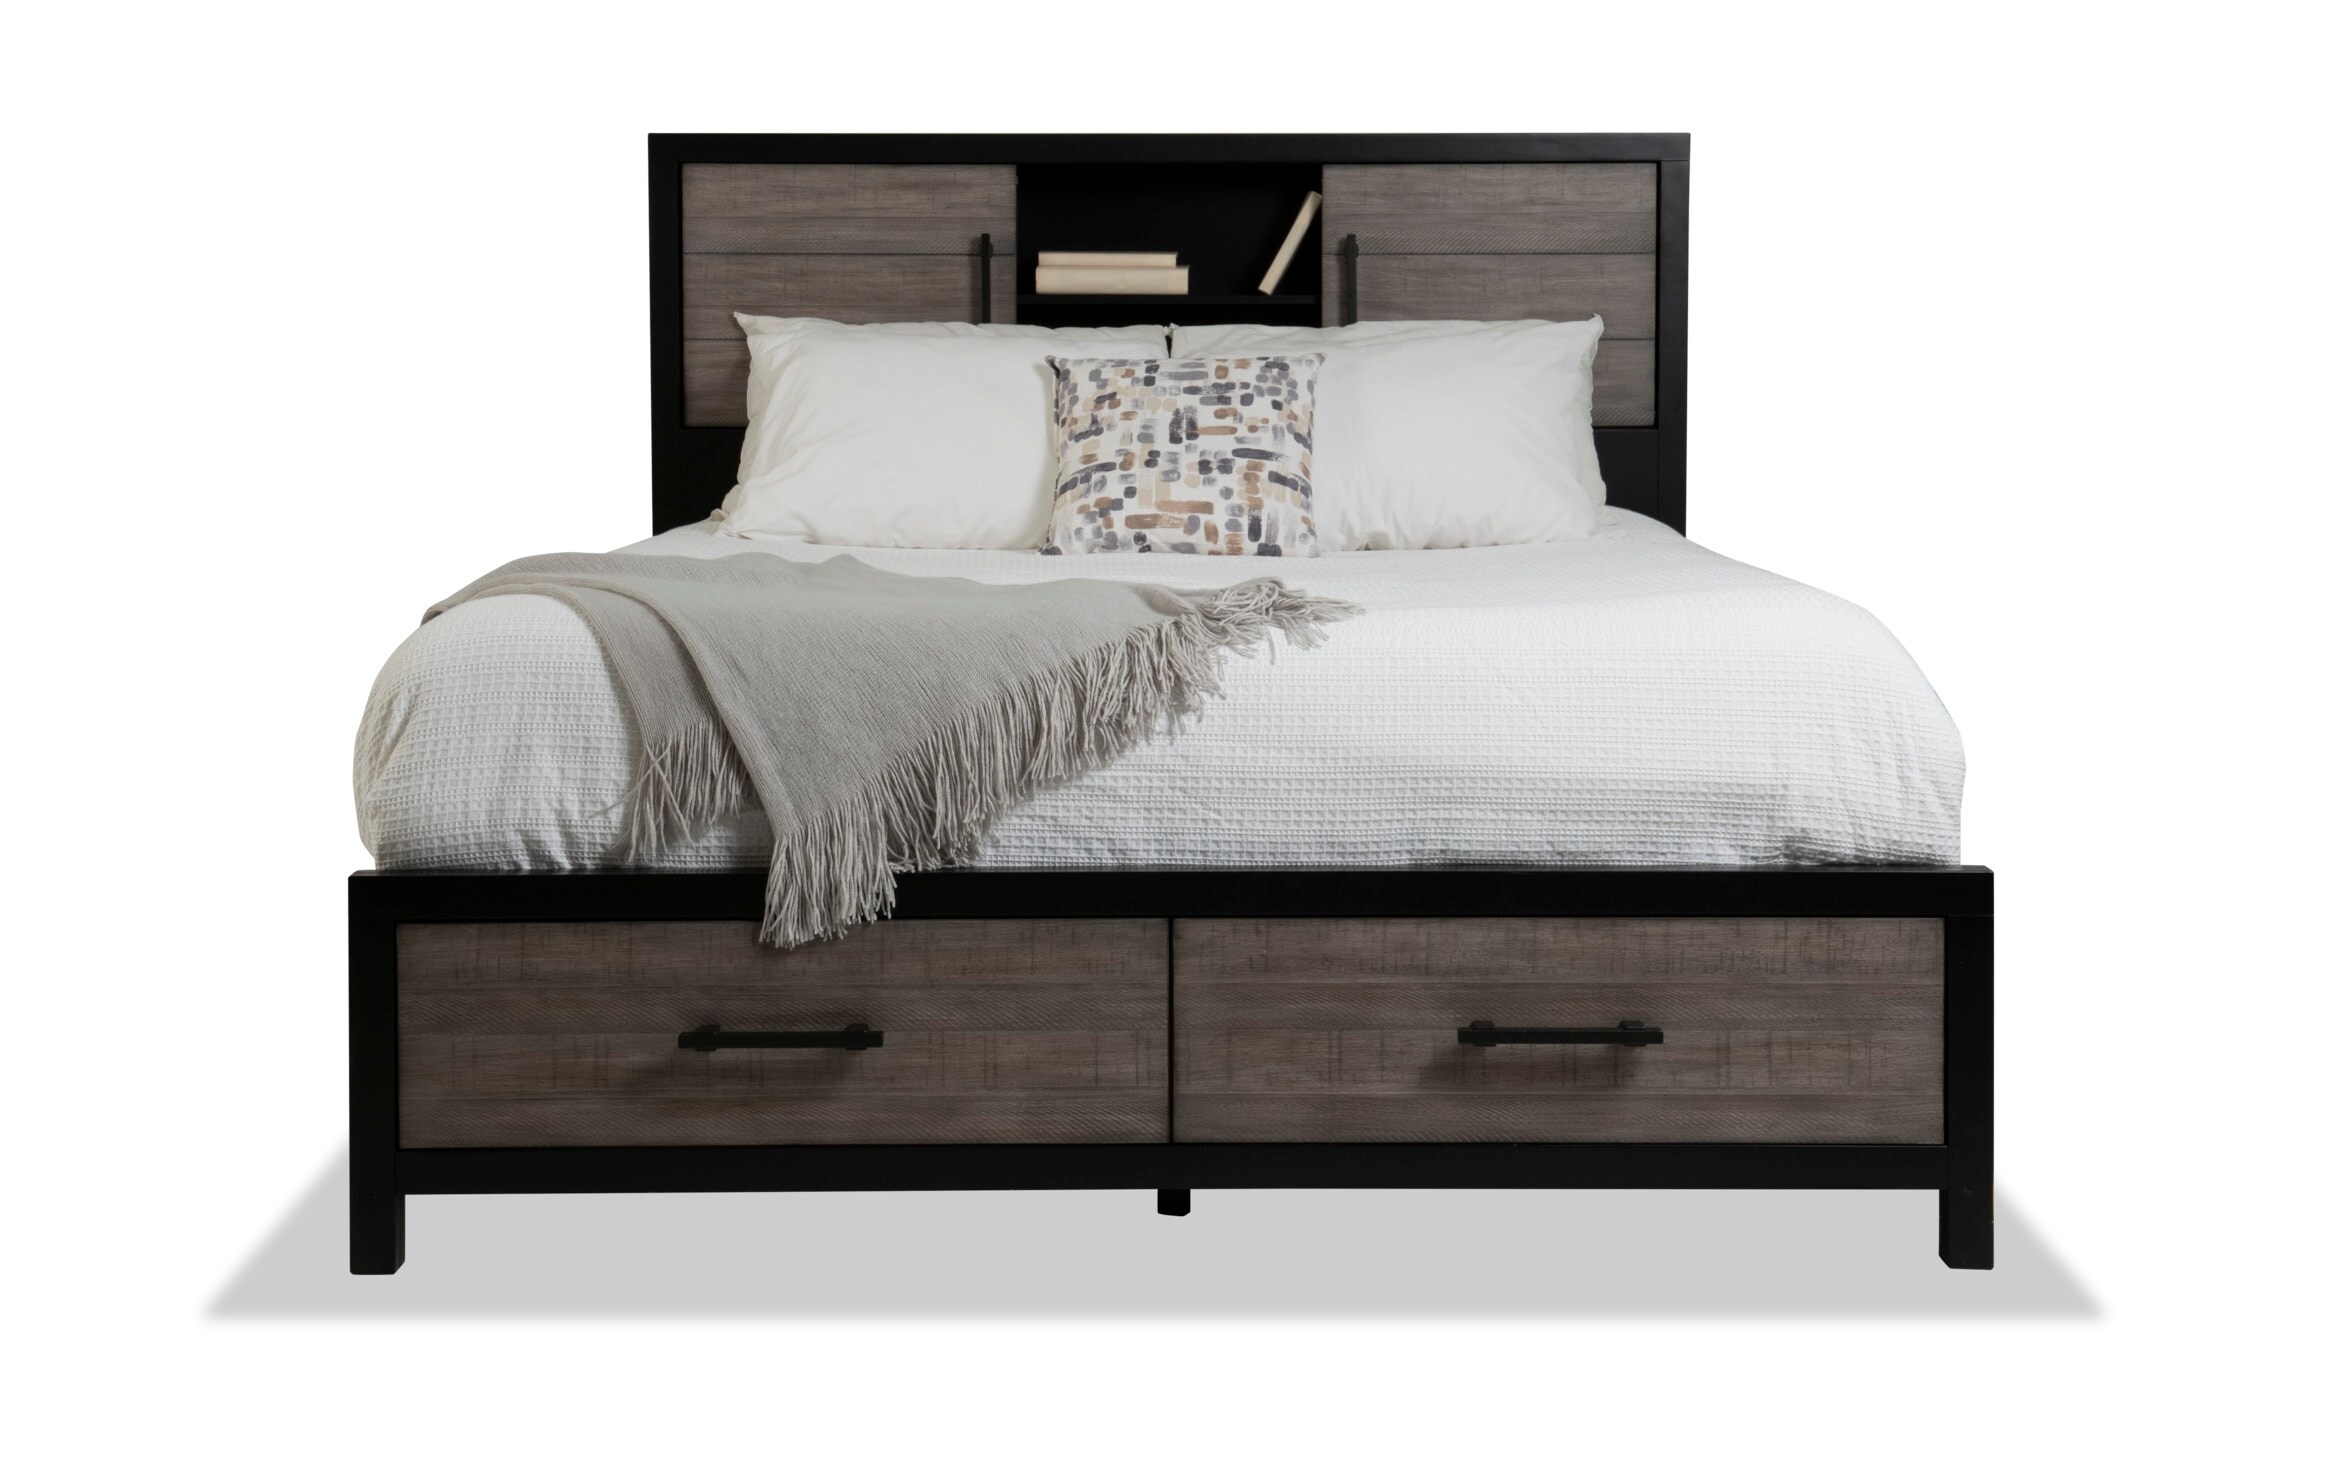 Gray Bookcase Storage Bed, Bookcase Headboard King Bedroom Set